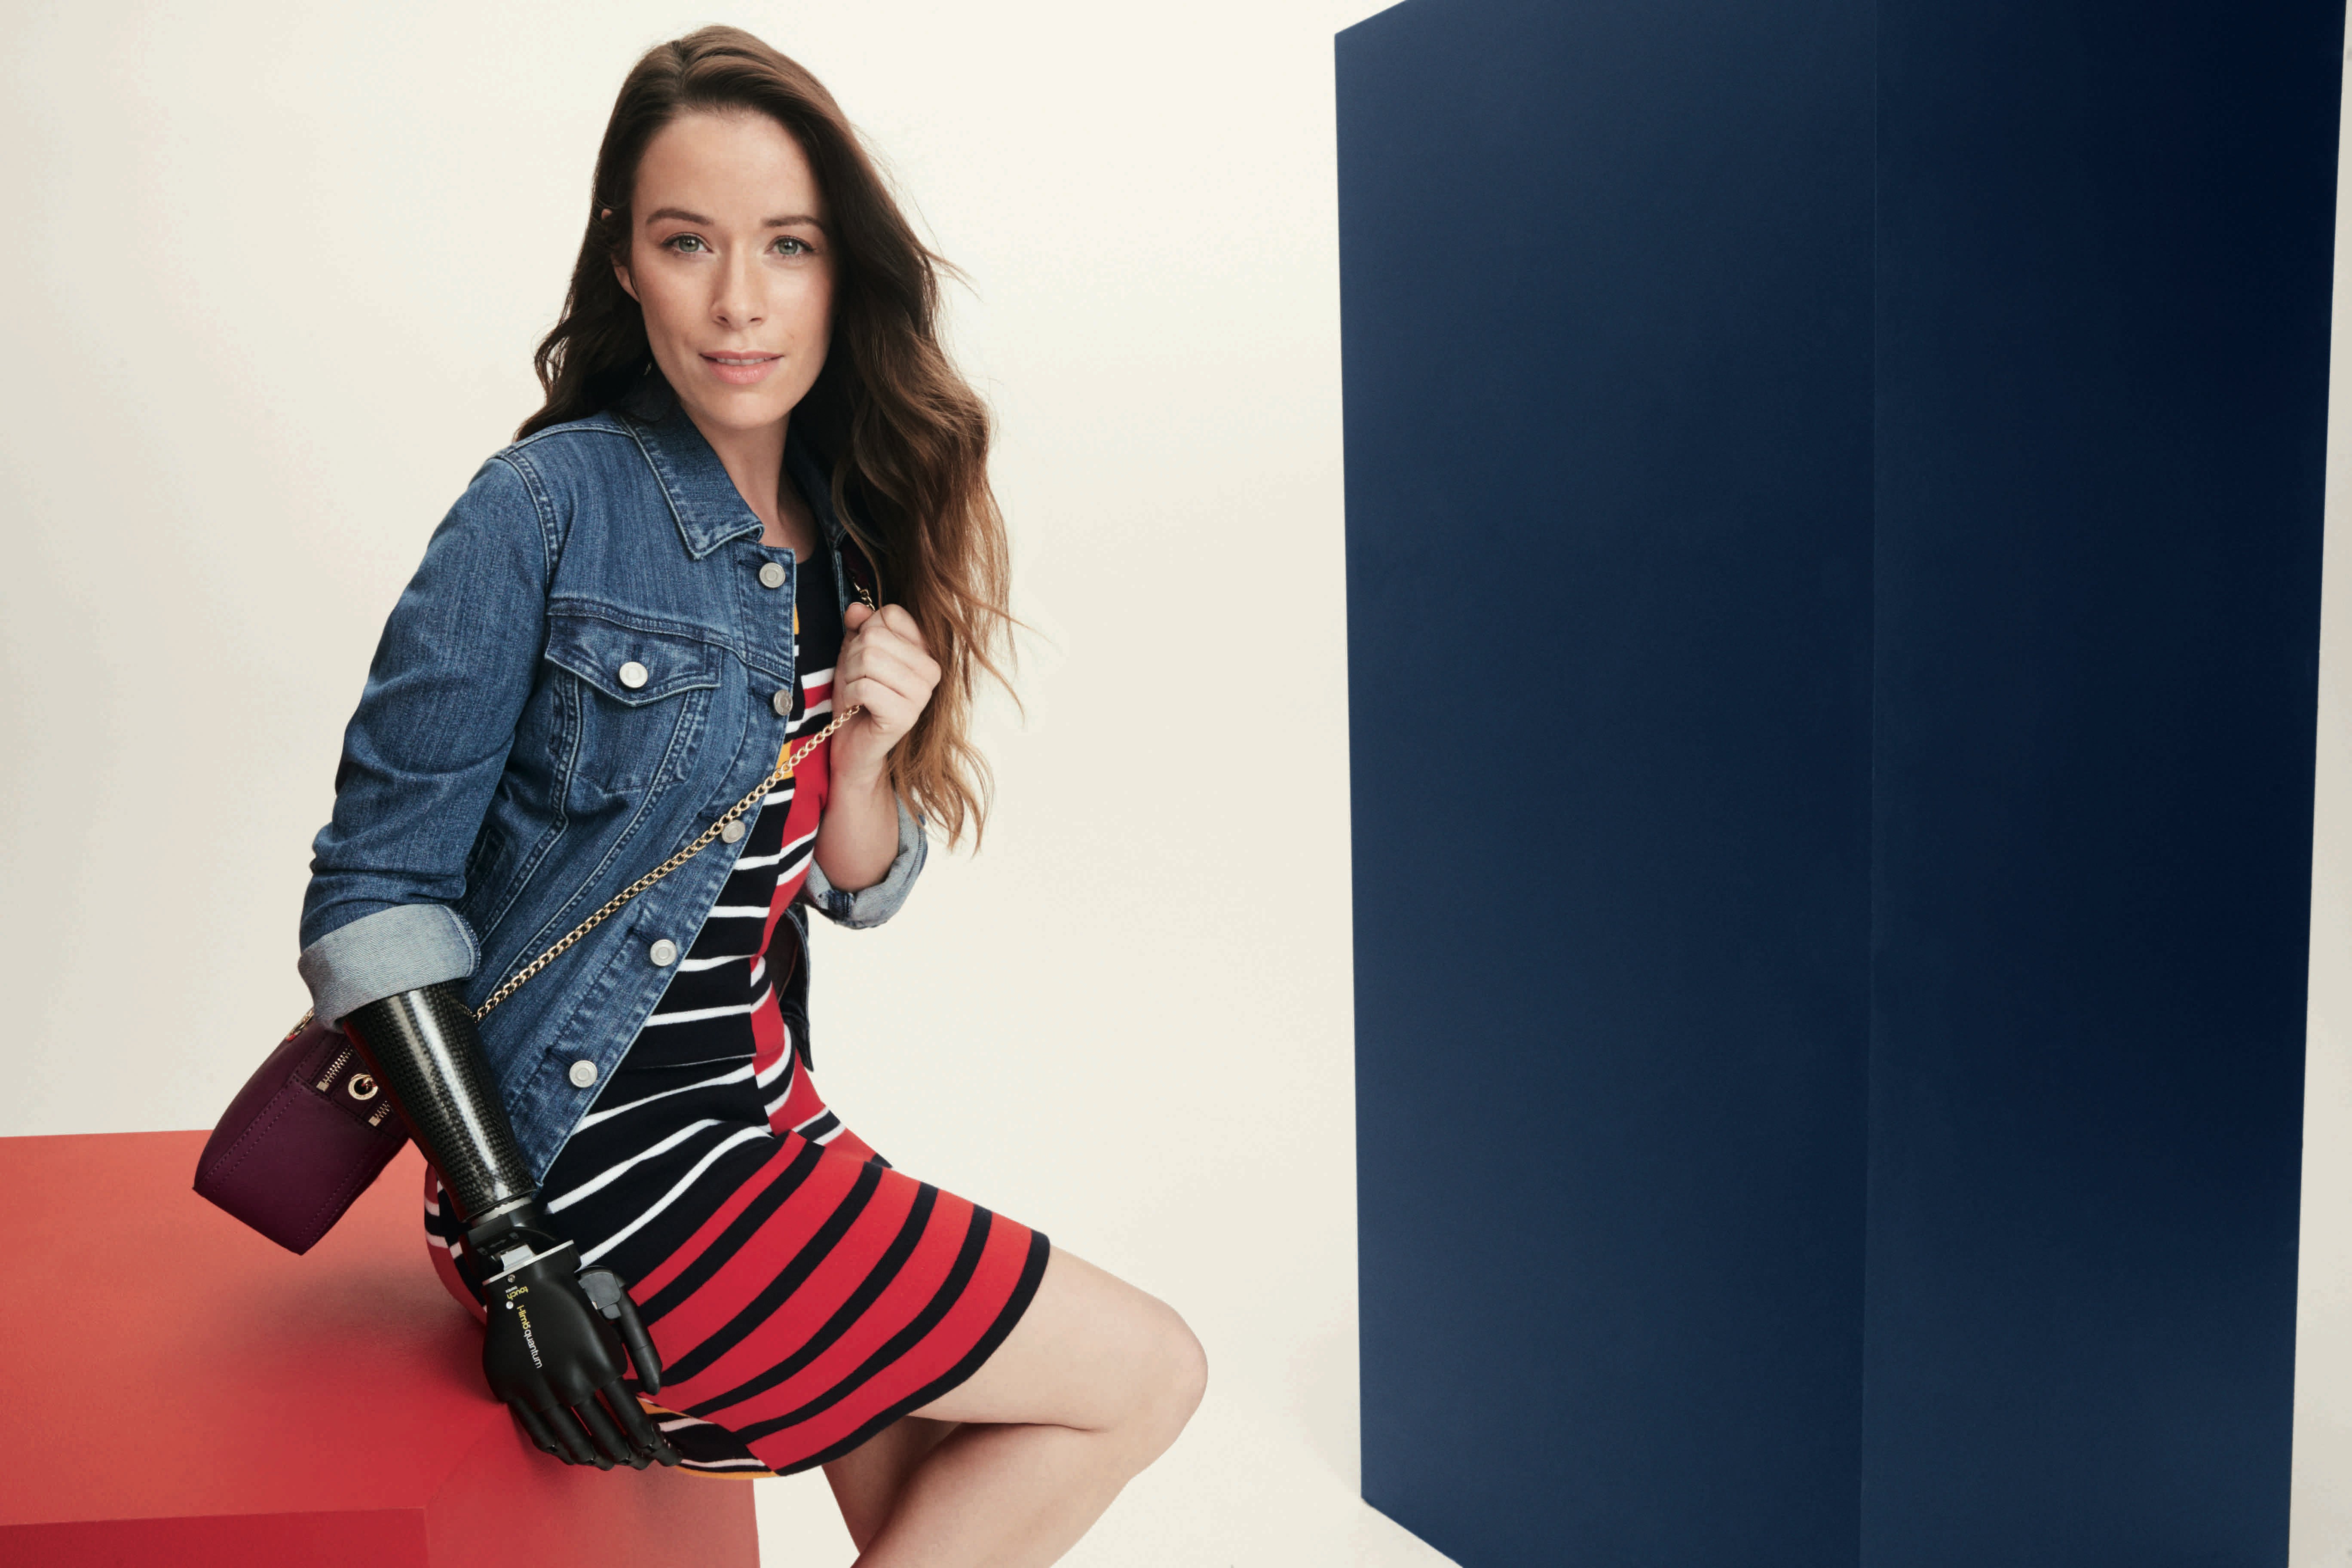 Tommy Hilfiger's Adaptive Clothing Line Offers Ease, Fashion to